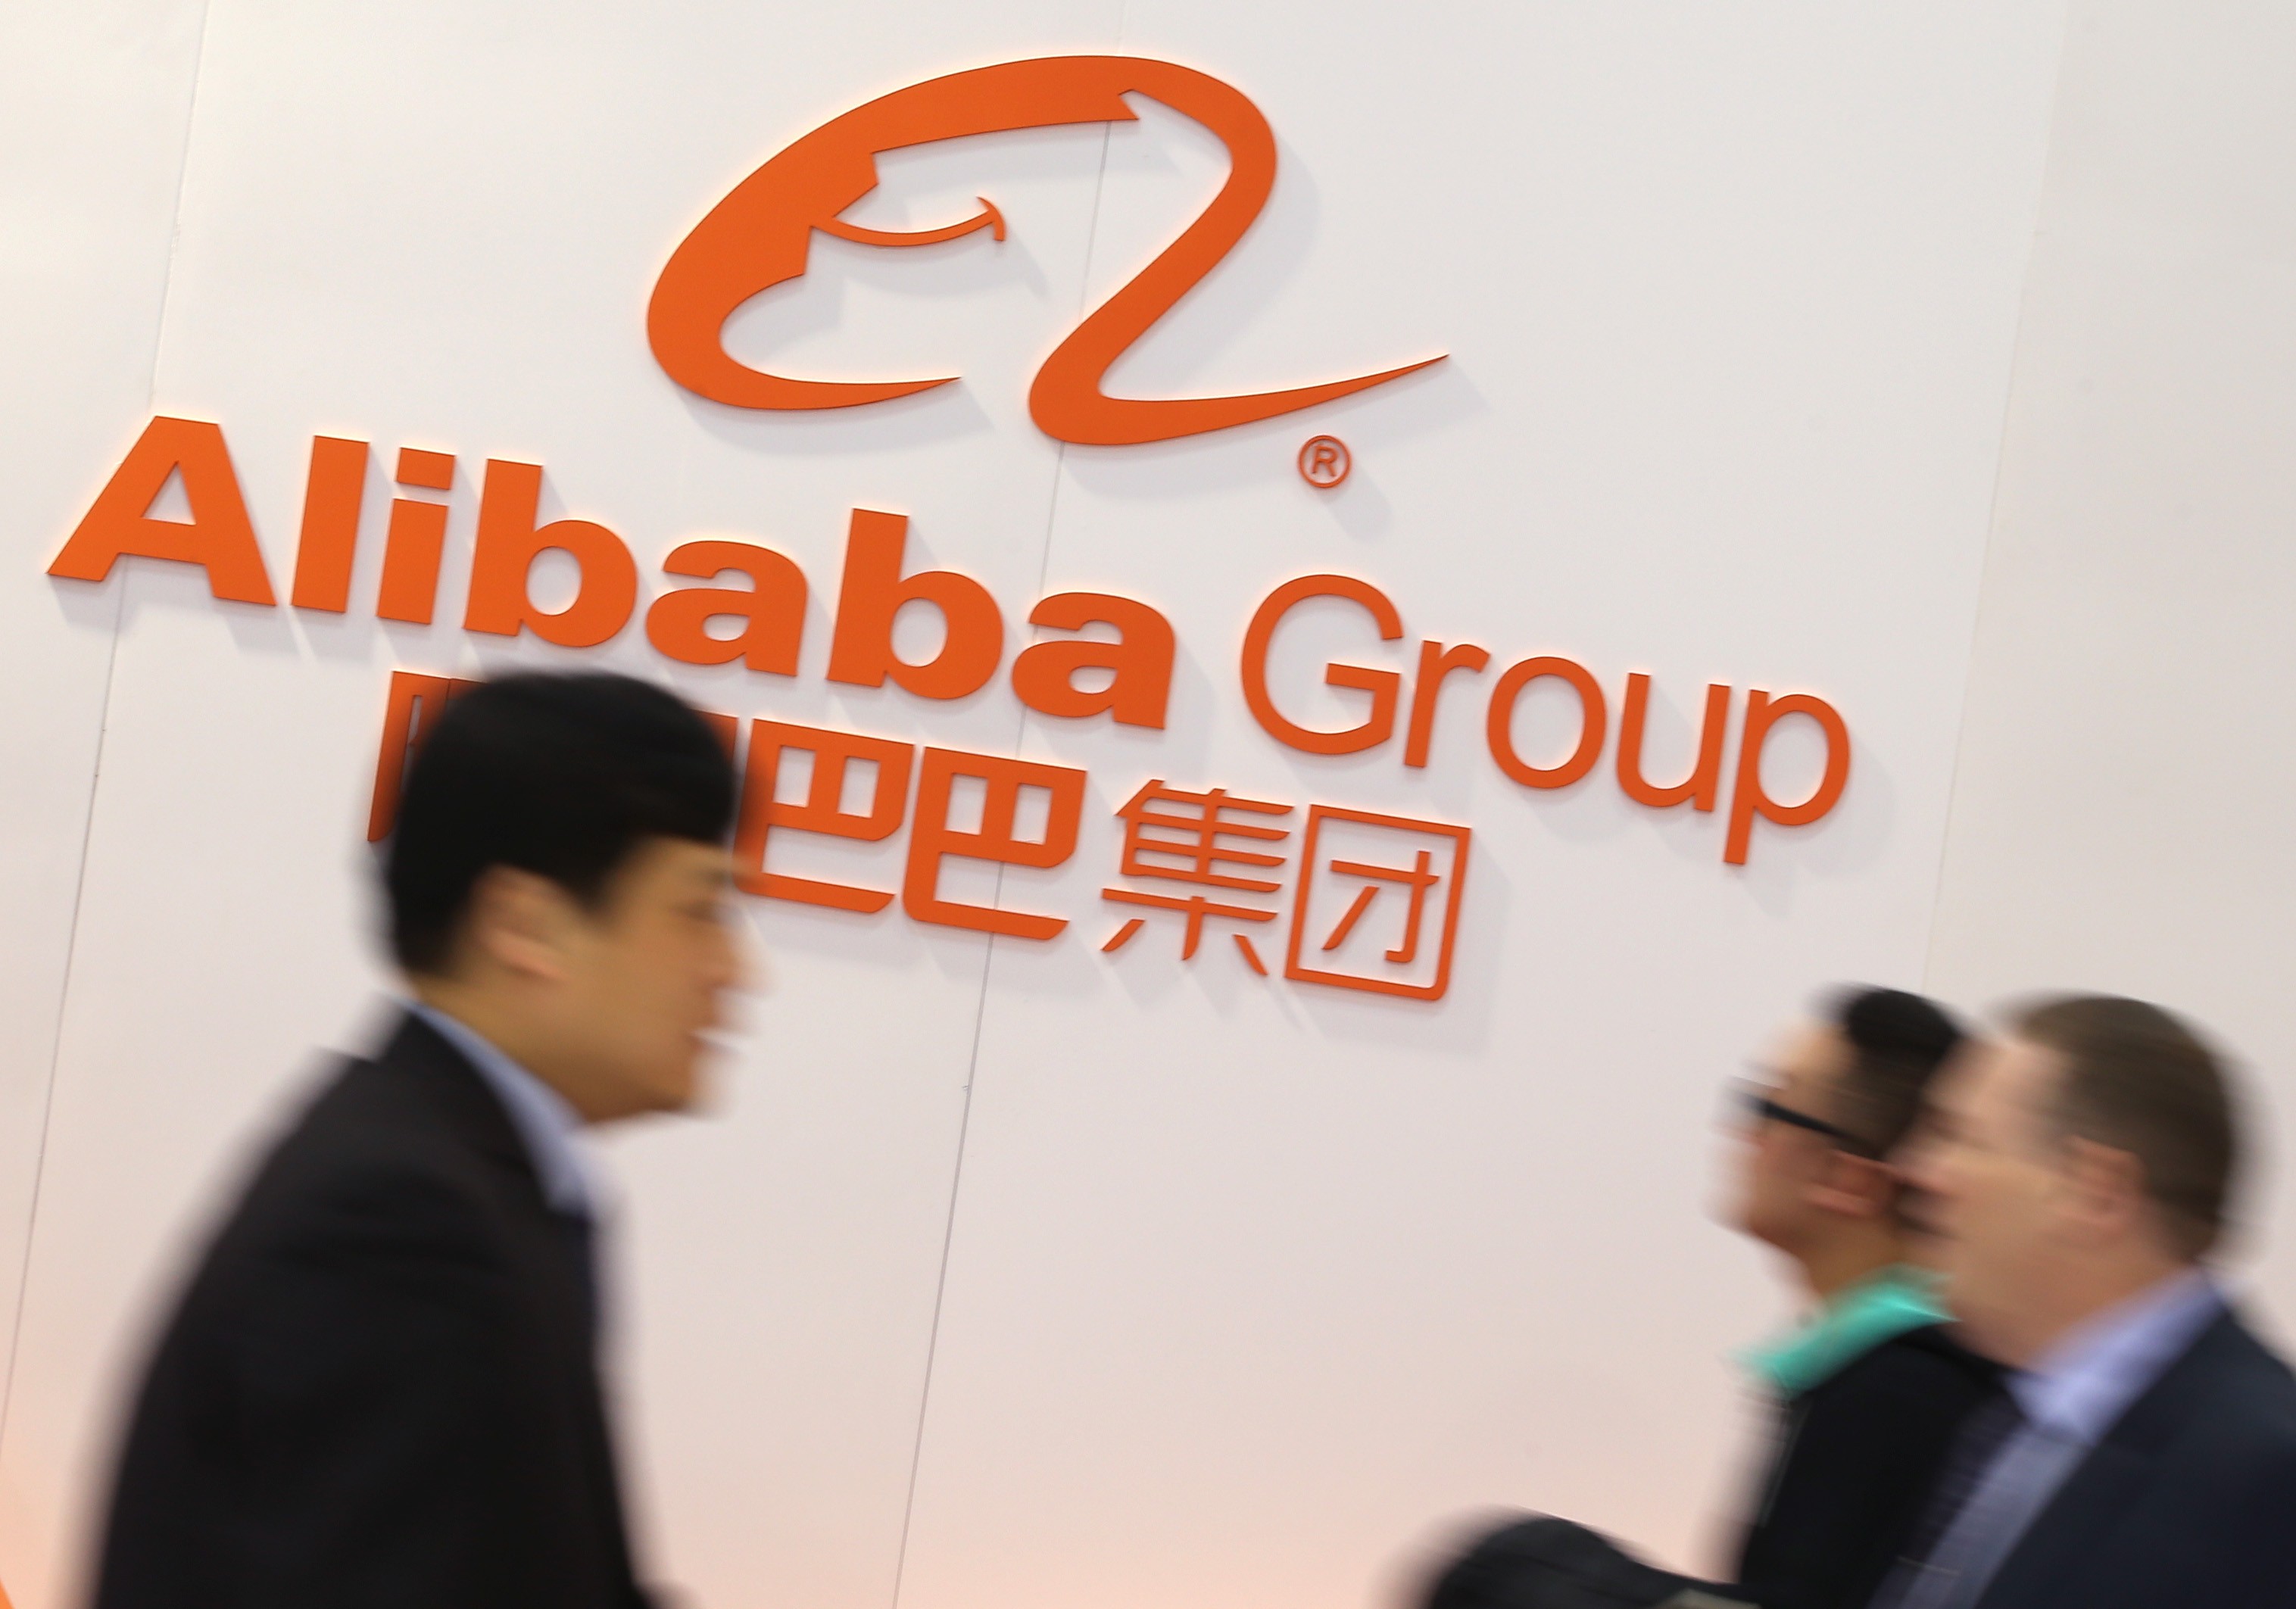 People pass by the logo of e-commerce giant Alibaba Group Holding. Photo: dpa